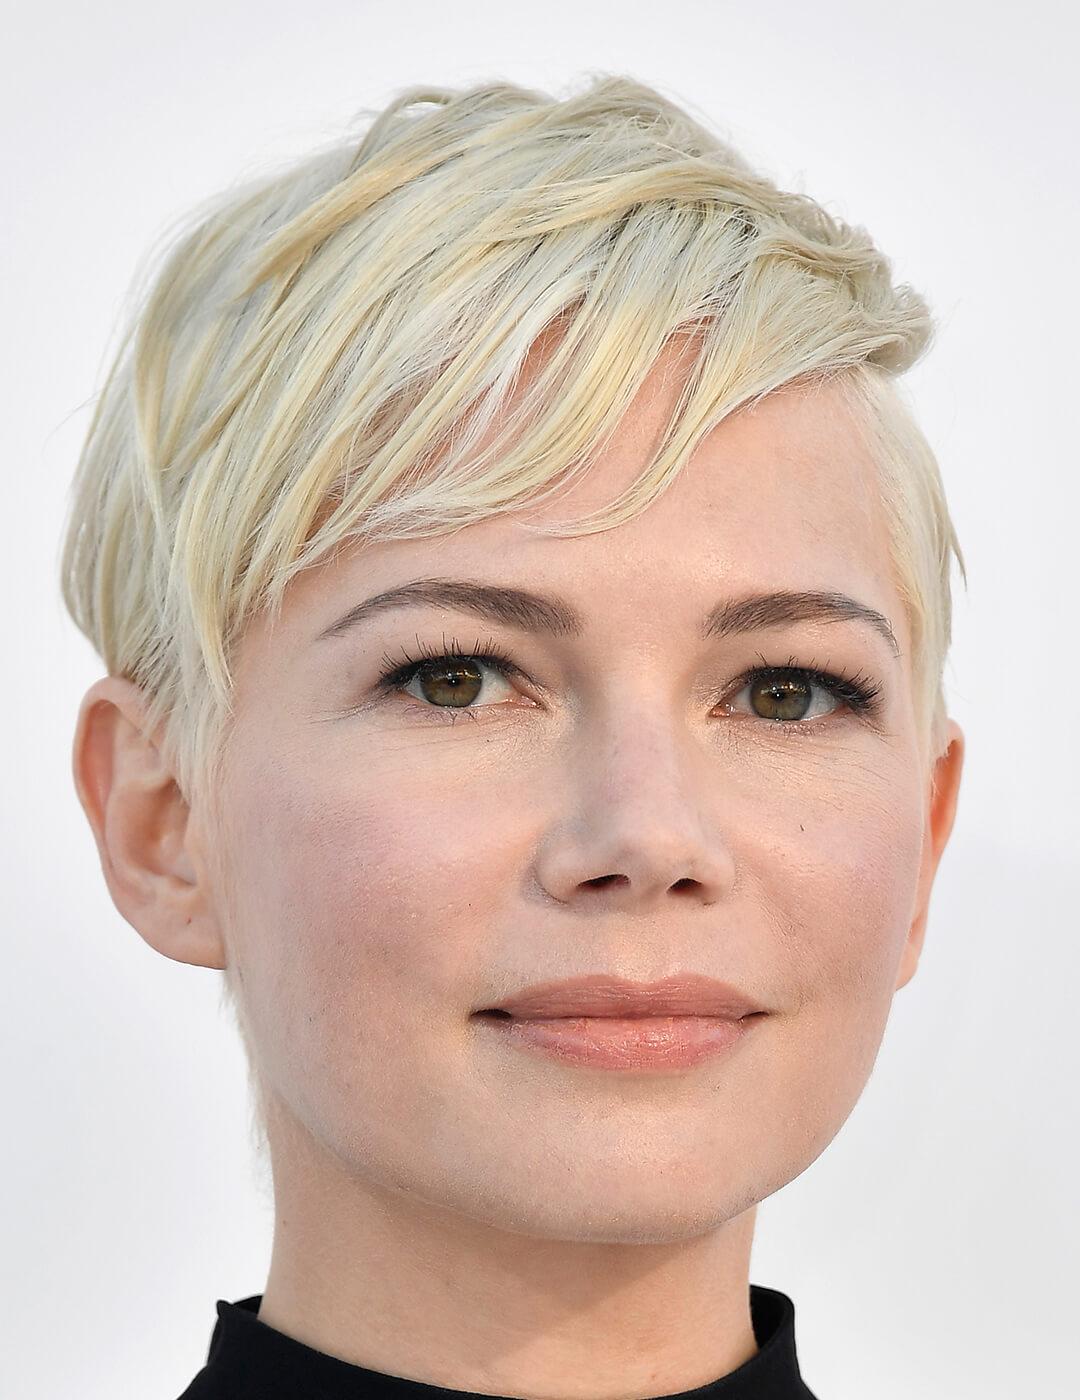 A photo of Michelle Williams with a pixie shag